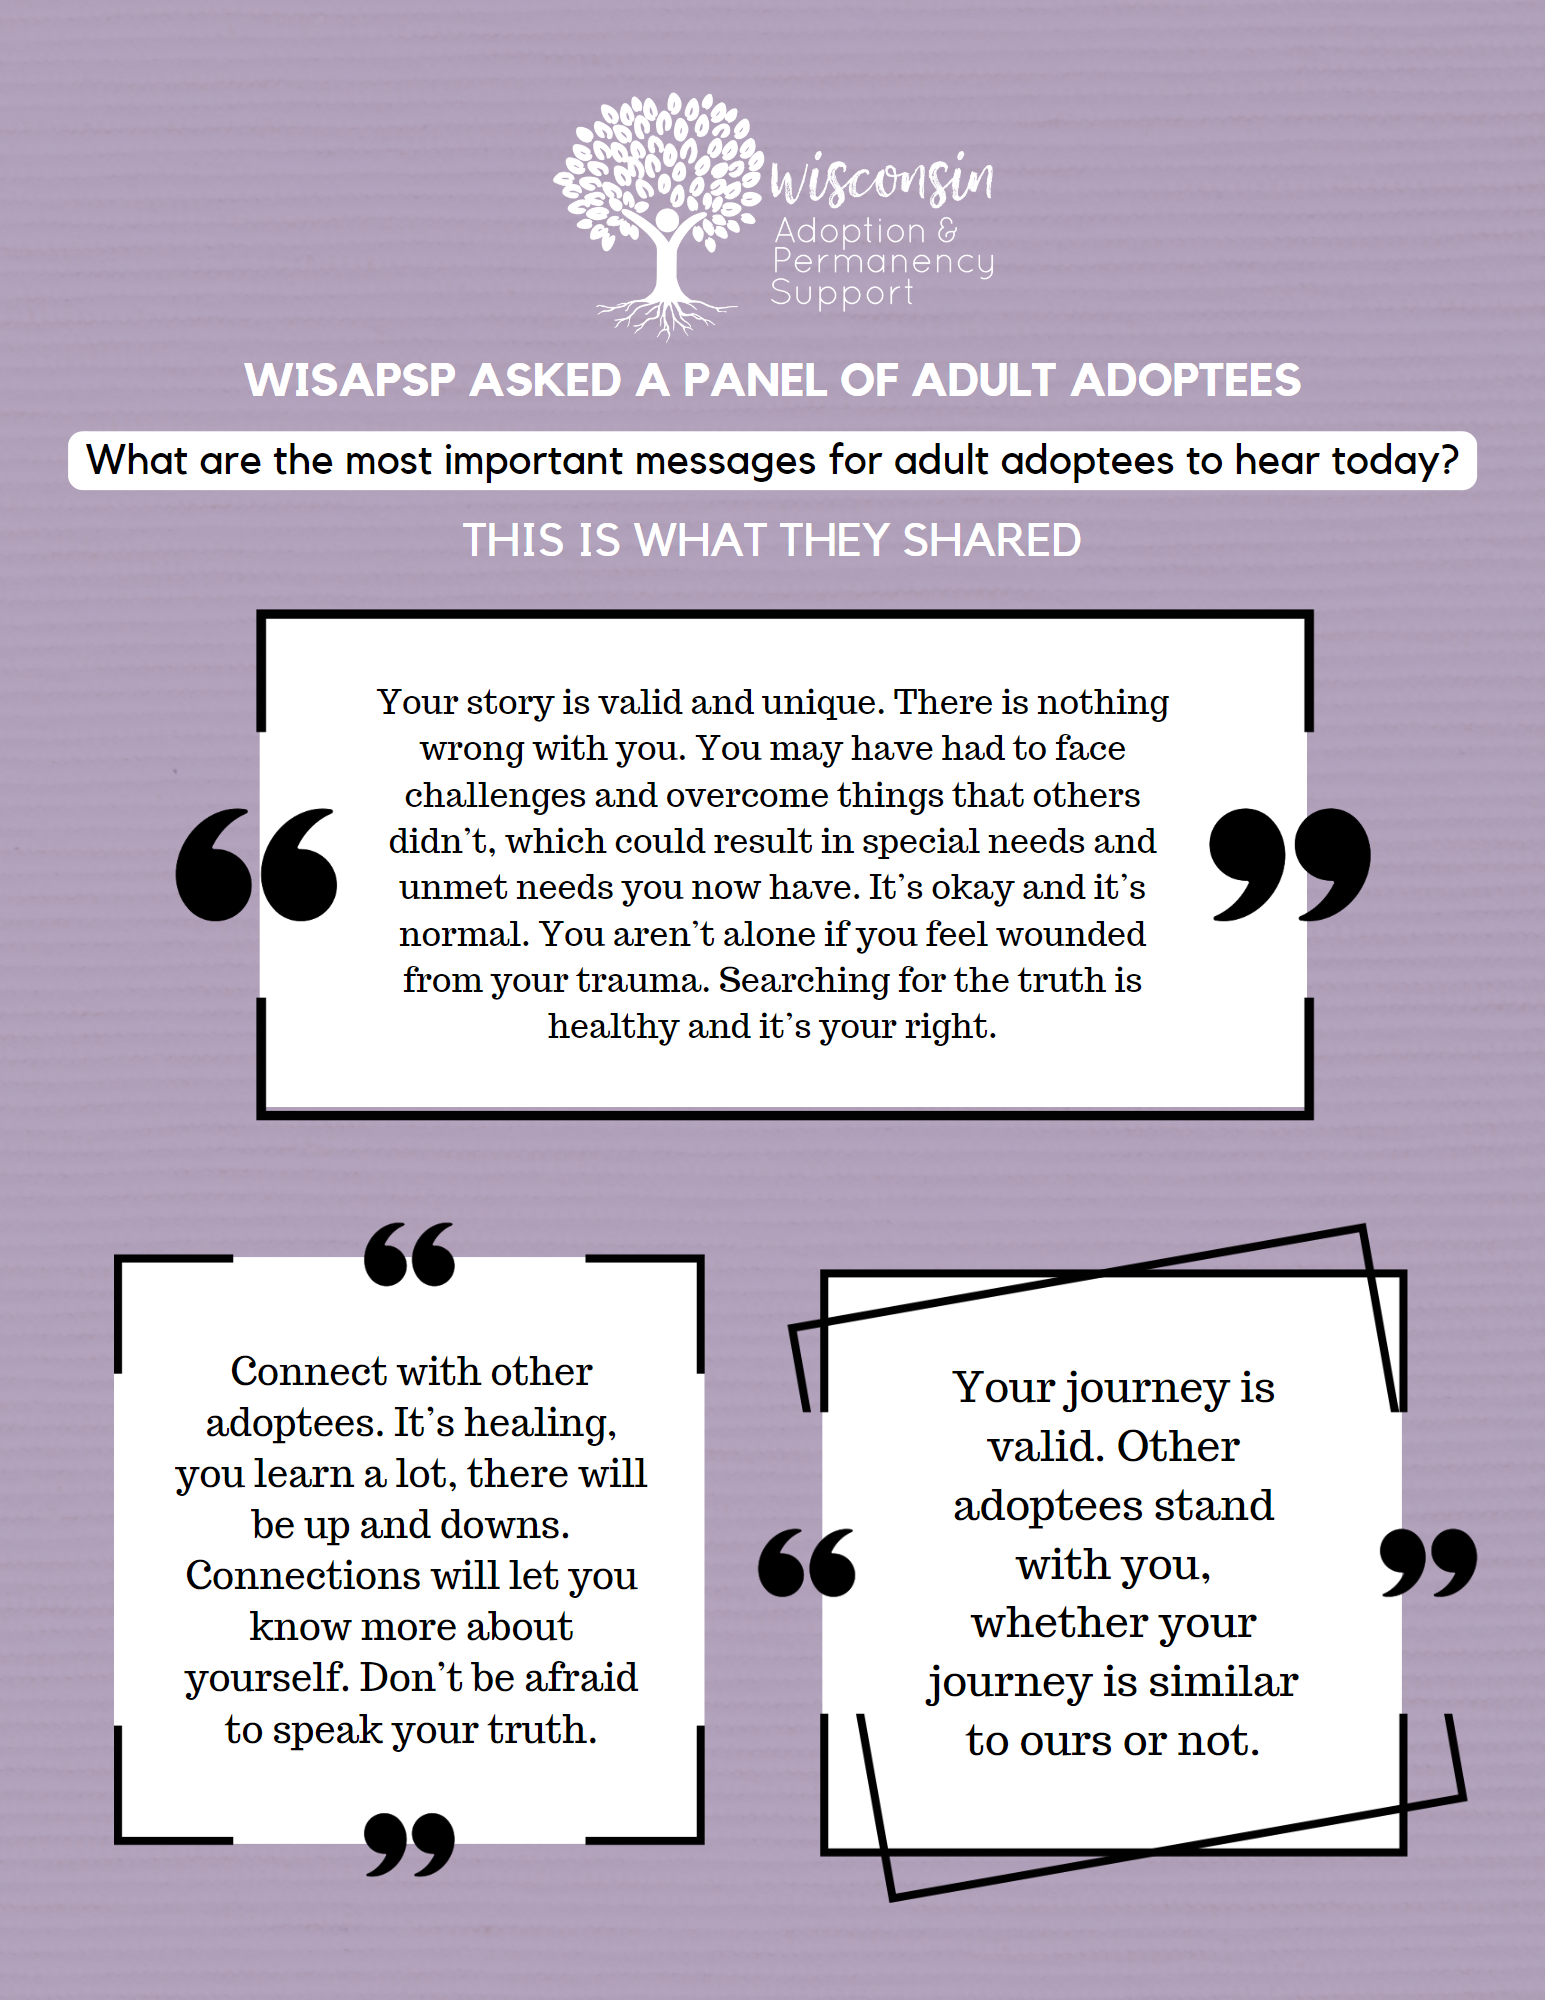 Important Messages for Adult Adoptees